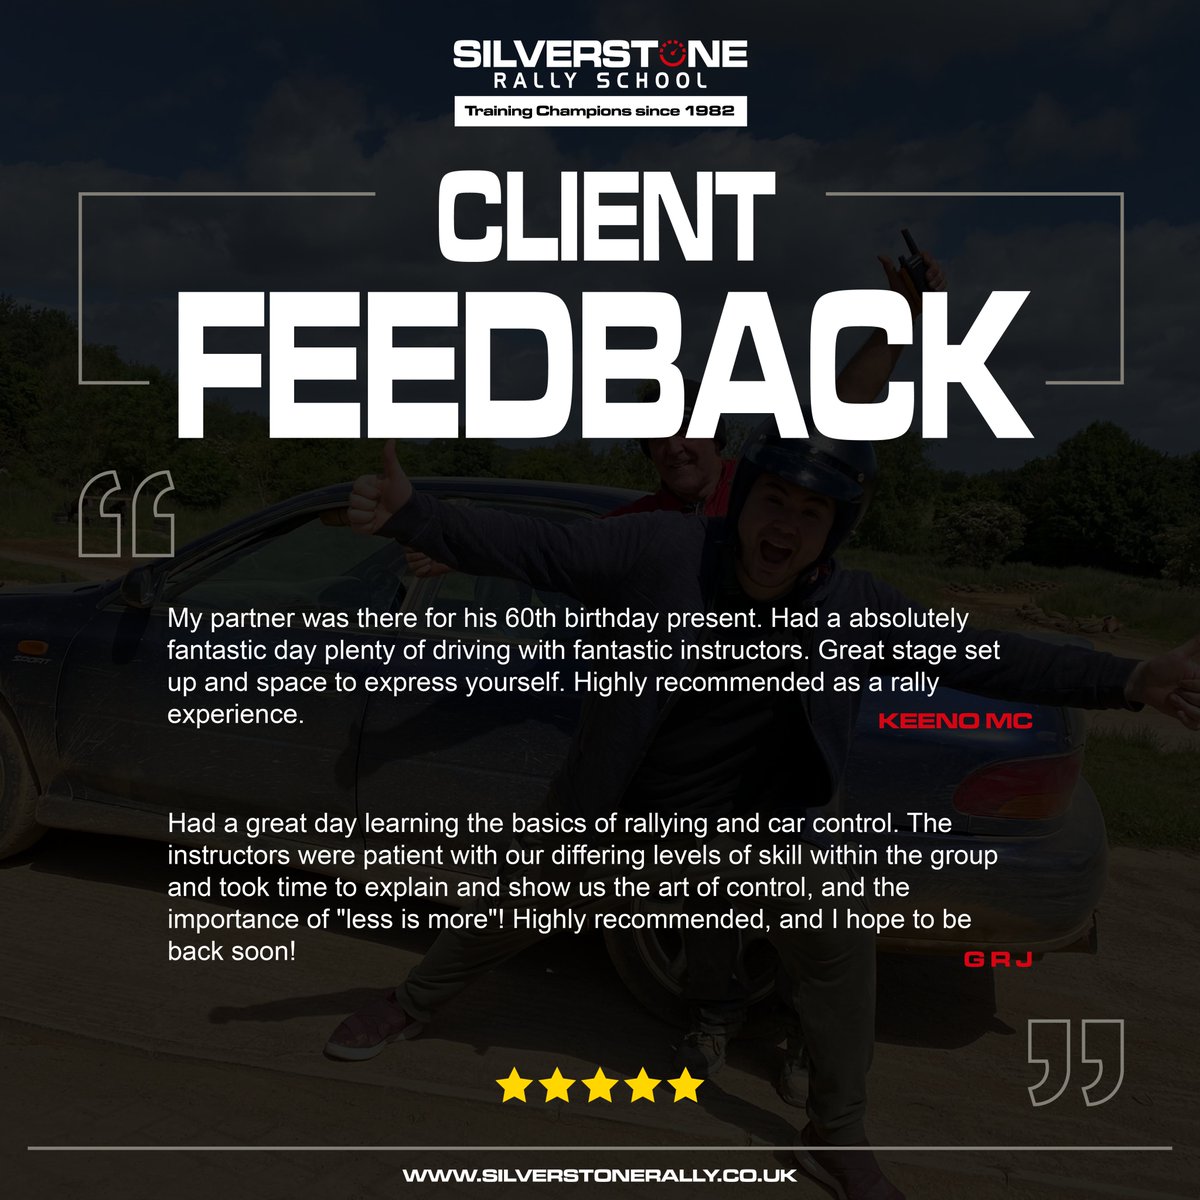 Take a look at what our customers have to say about their experience with Silverstone Rally School!

#SilverstoneRally #SilverstoneRallySchool #Rallying #GoRallying #RallyDriving #FeedbackFriday #CustomerReviews #Silverstone #UK